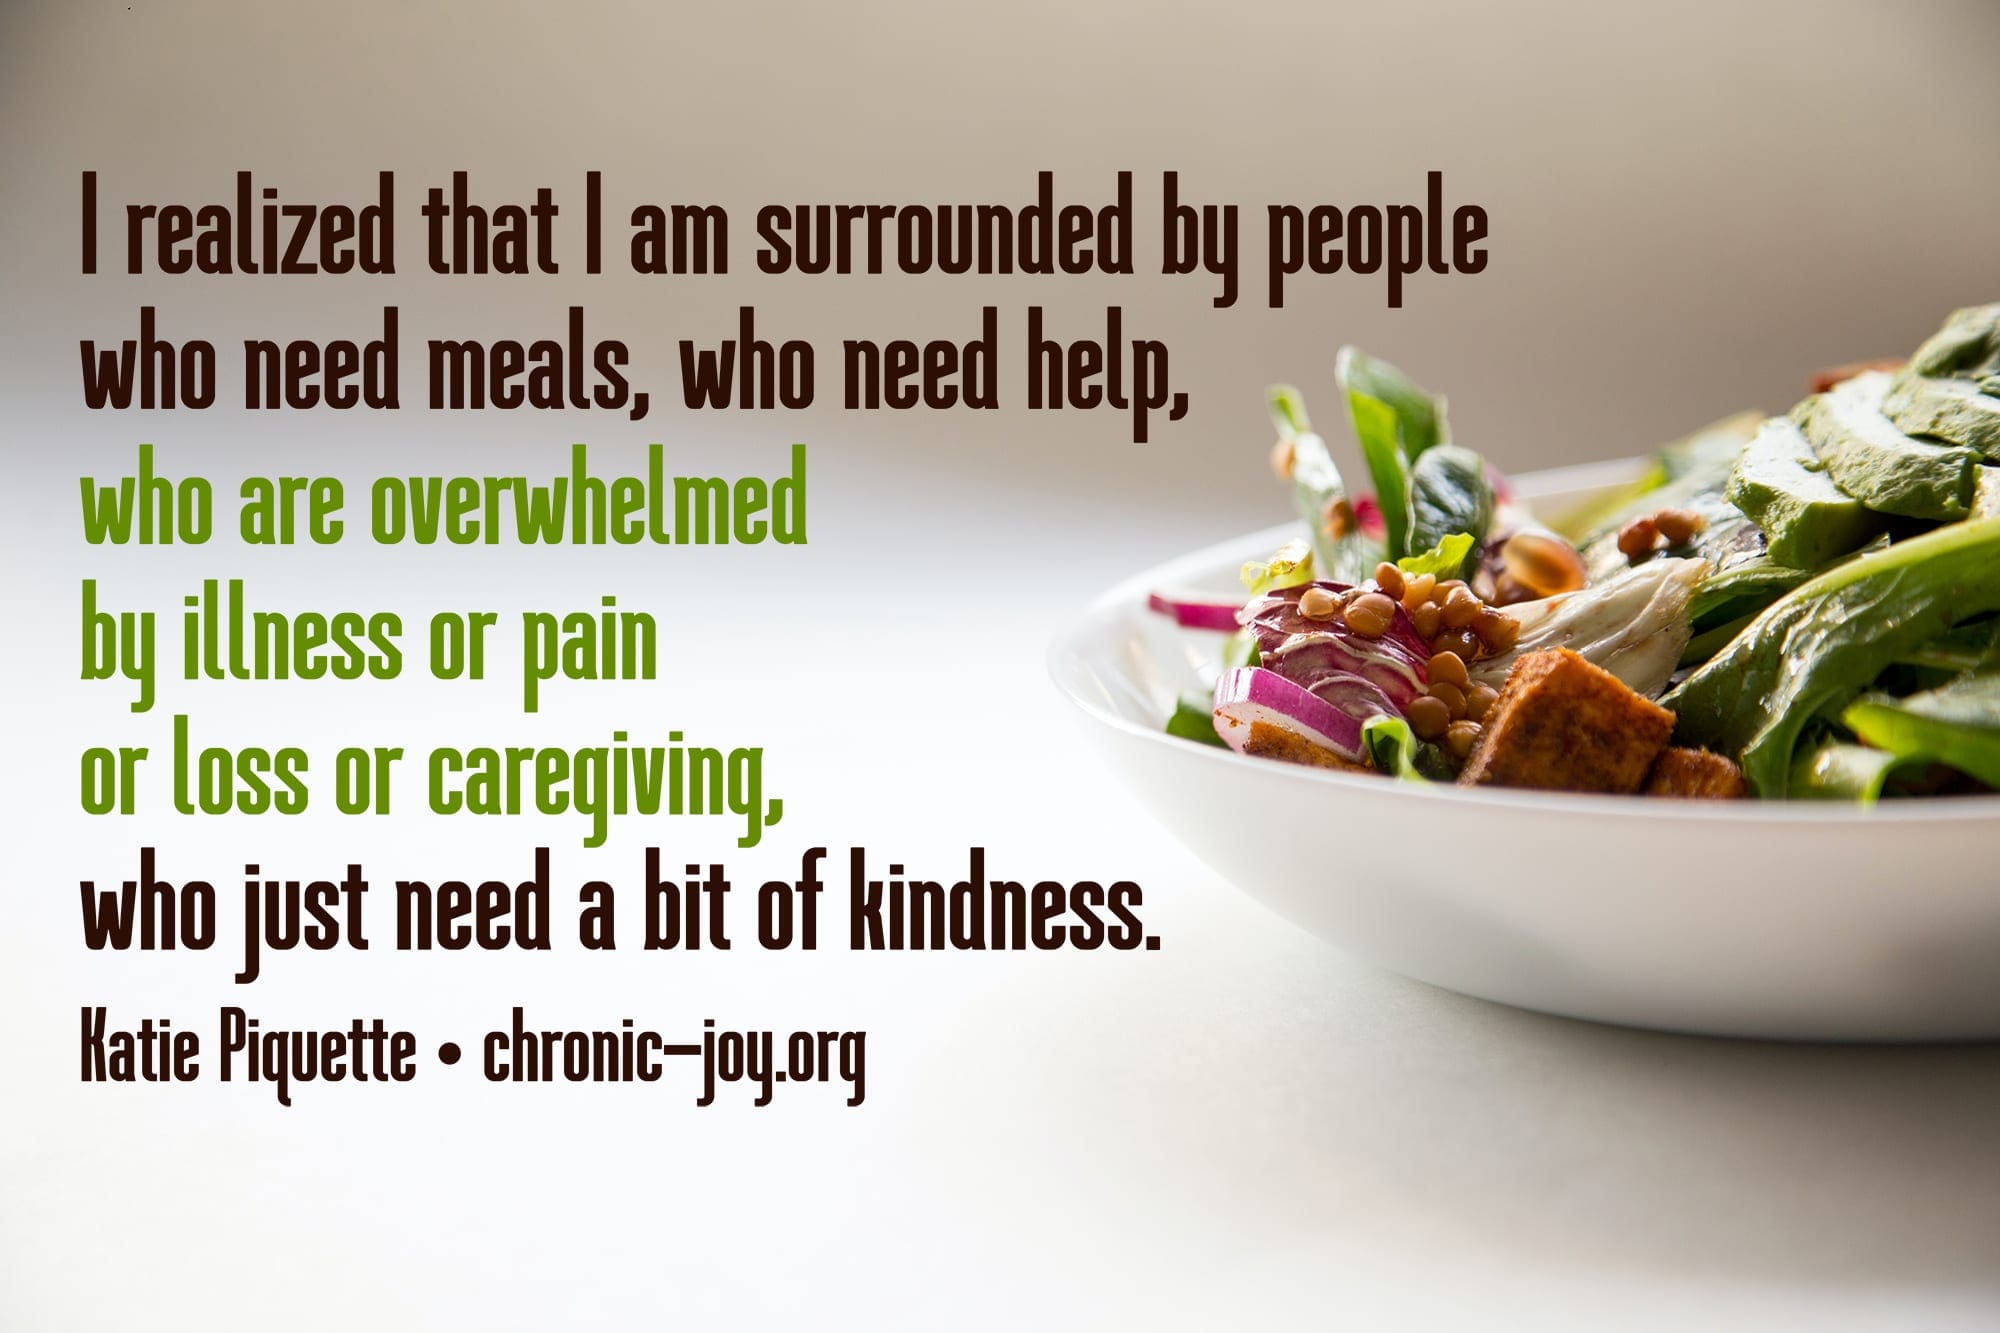 "I realized that I am surrounded by people who need meals, who need help, who are overwhelmed by illness or pain or loss or caregiving, who just need a bit of kindness." Katie Piquette